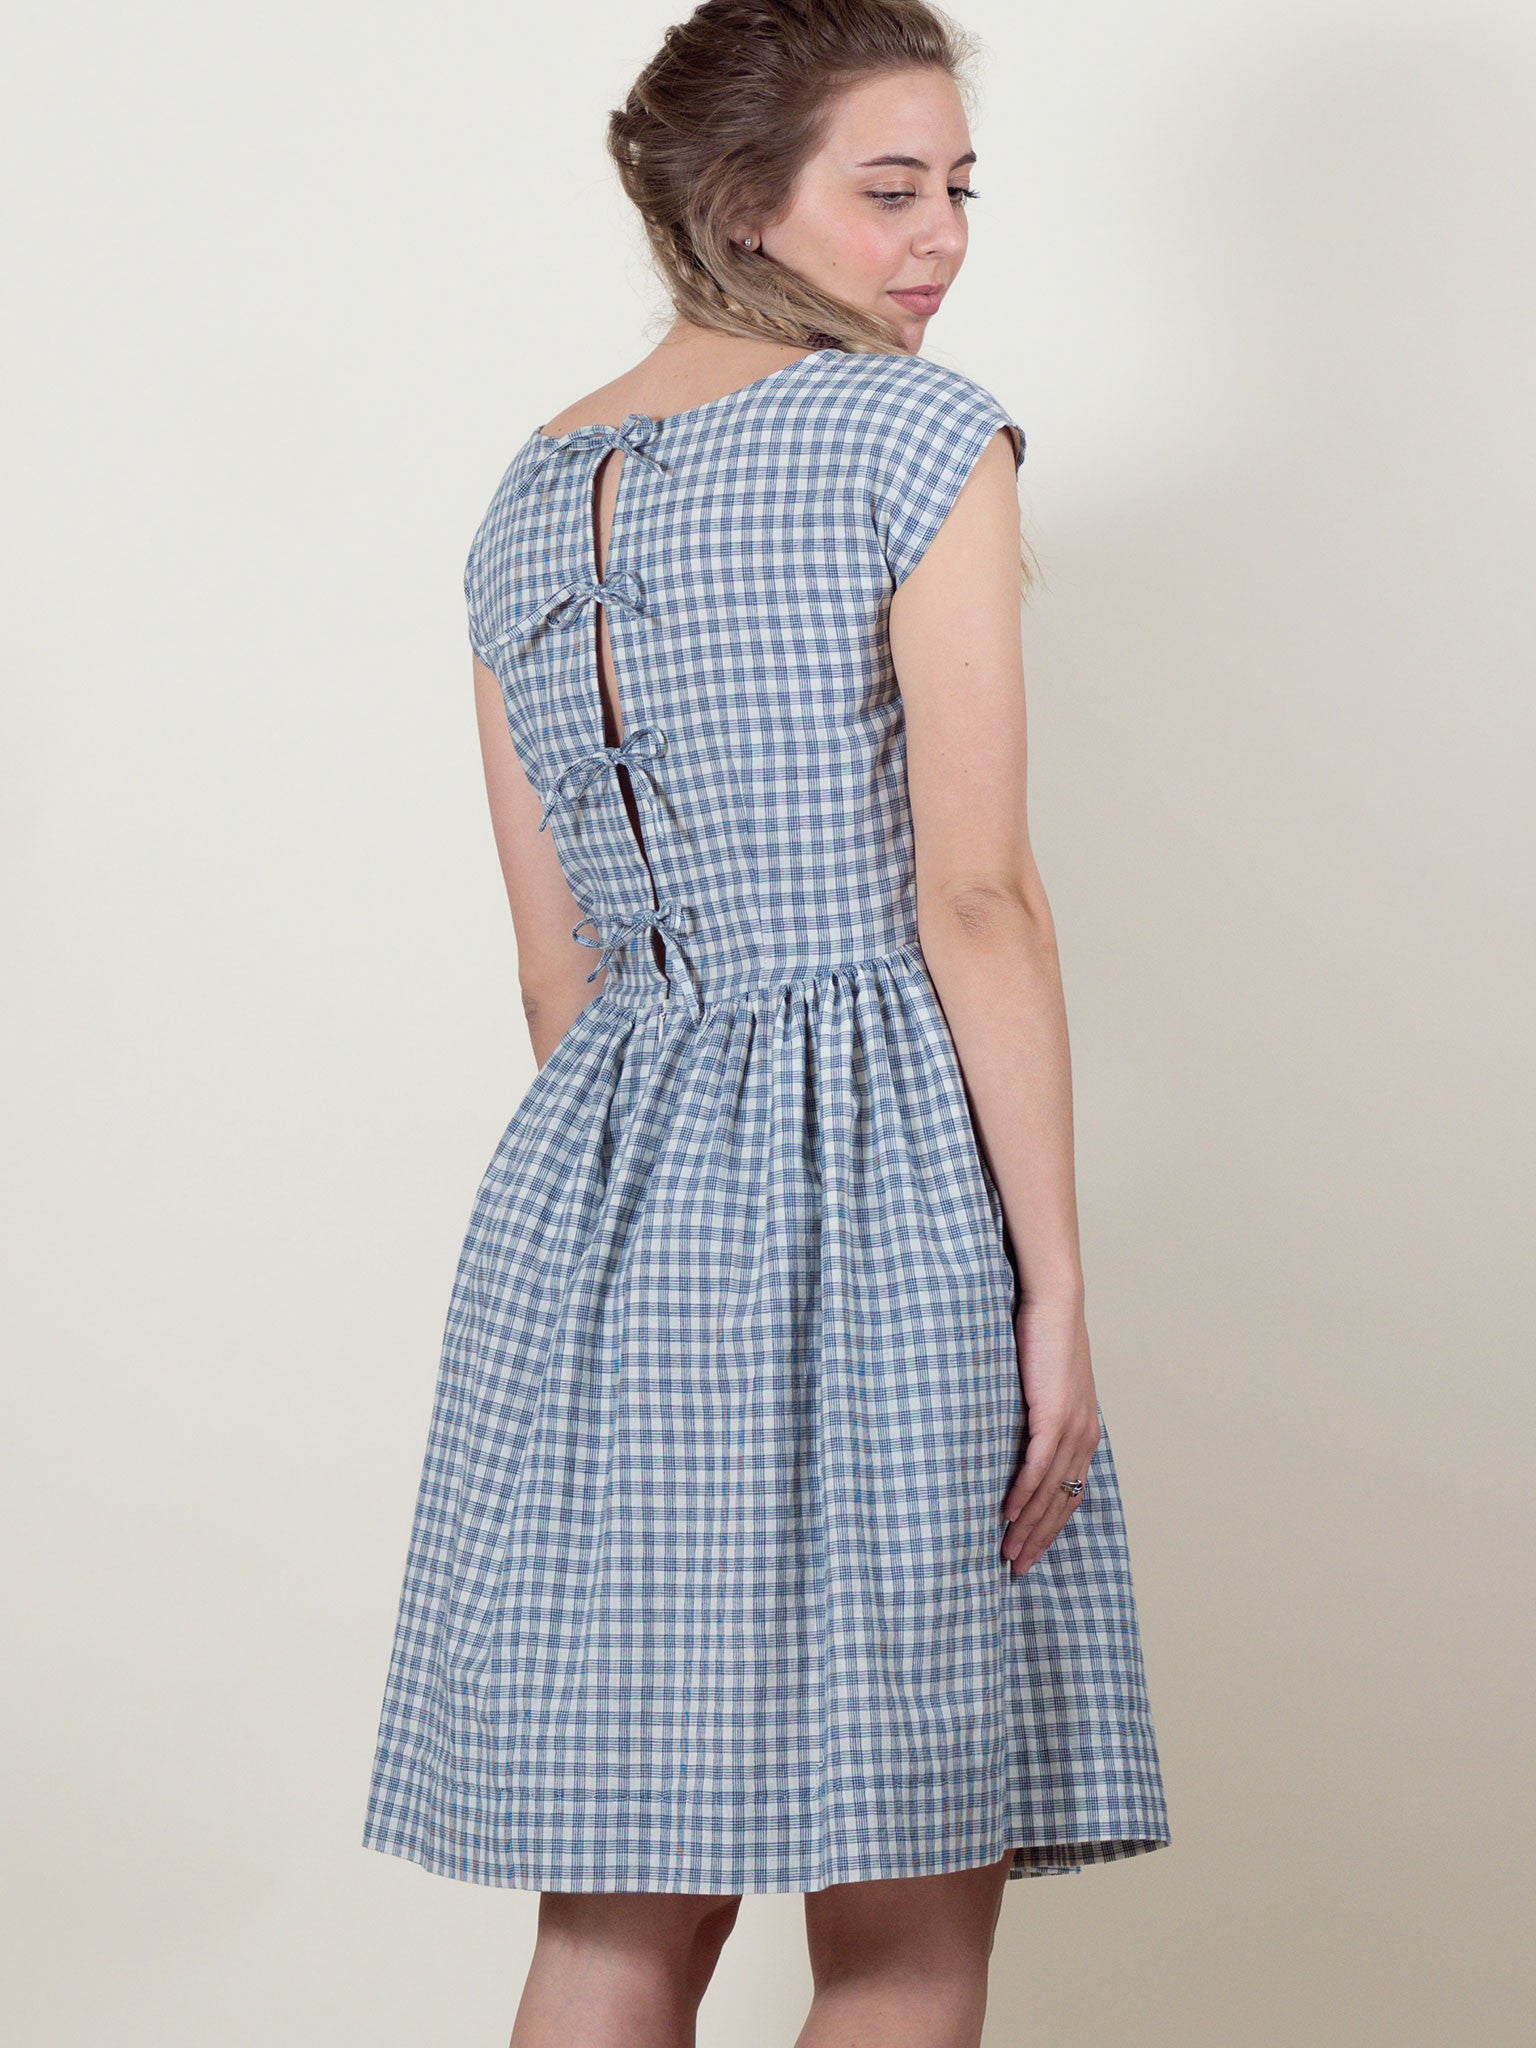 Meadow Dress in Navy Check | Margu